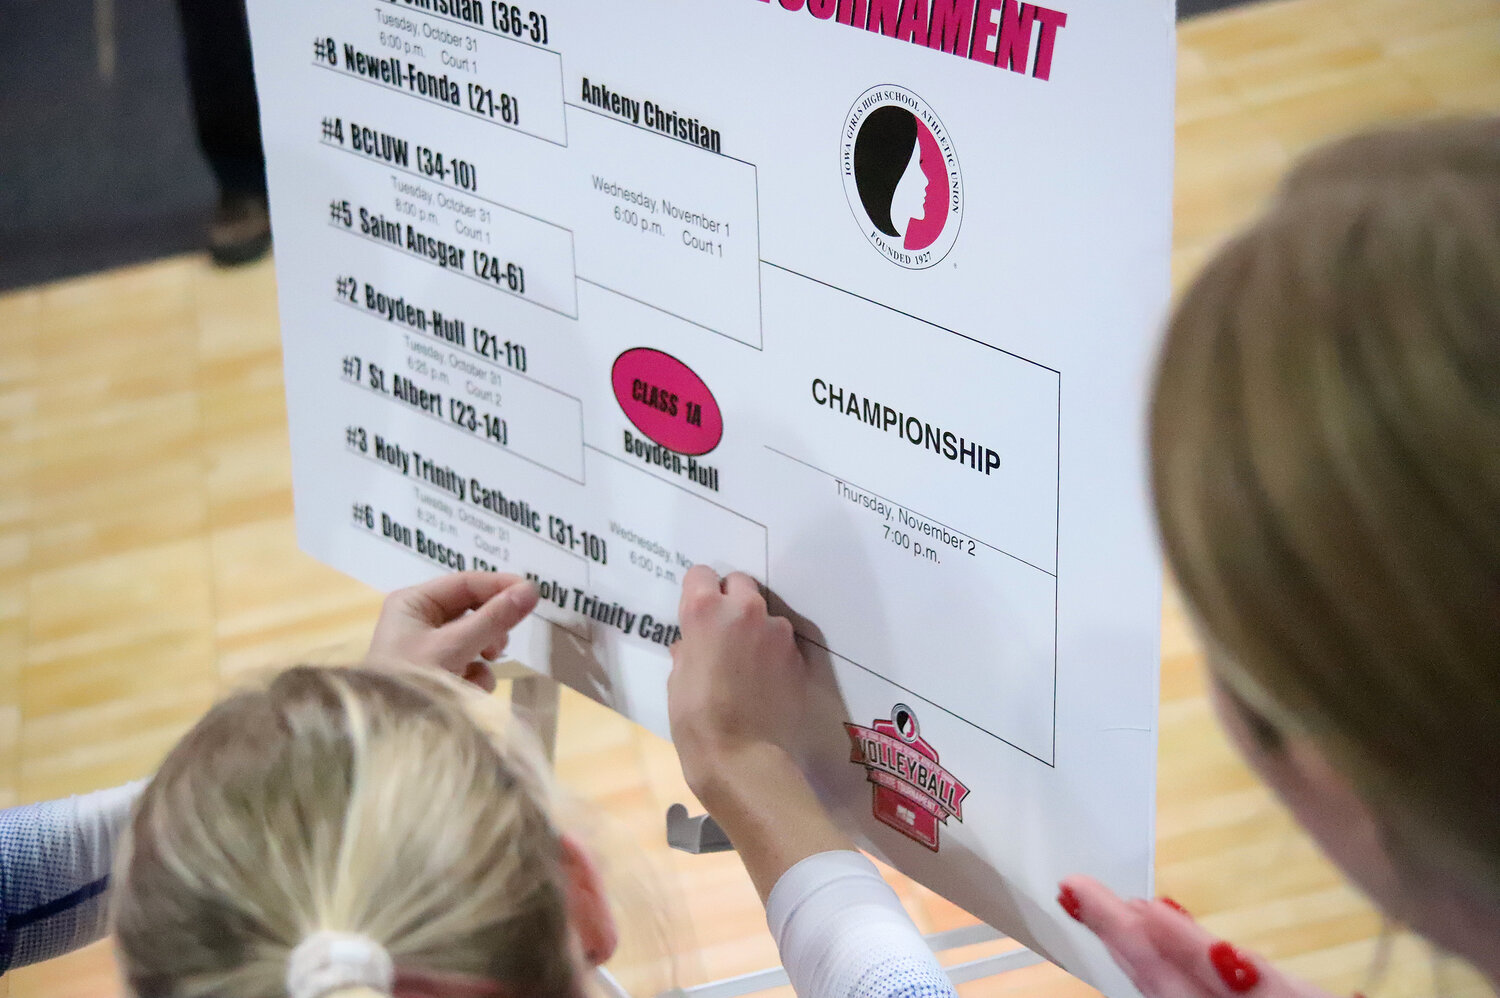 The Crusaders put their sticker on the bracket for the 1A semifinal match with Boyden Hull set for Wednesday in Coralville.